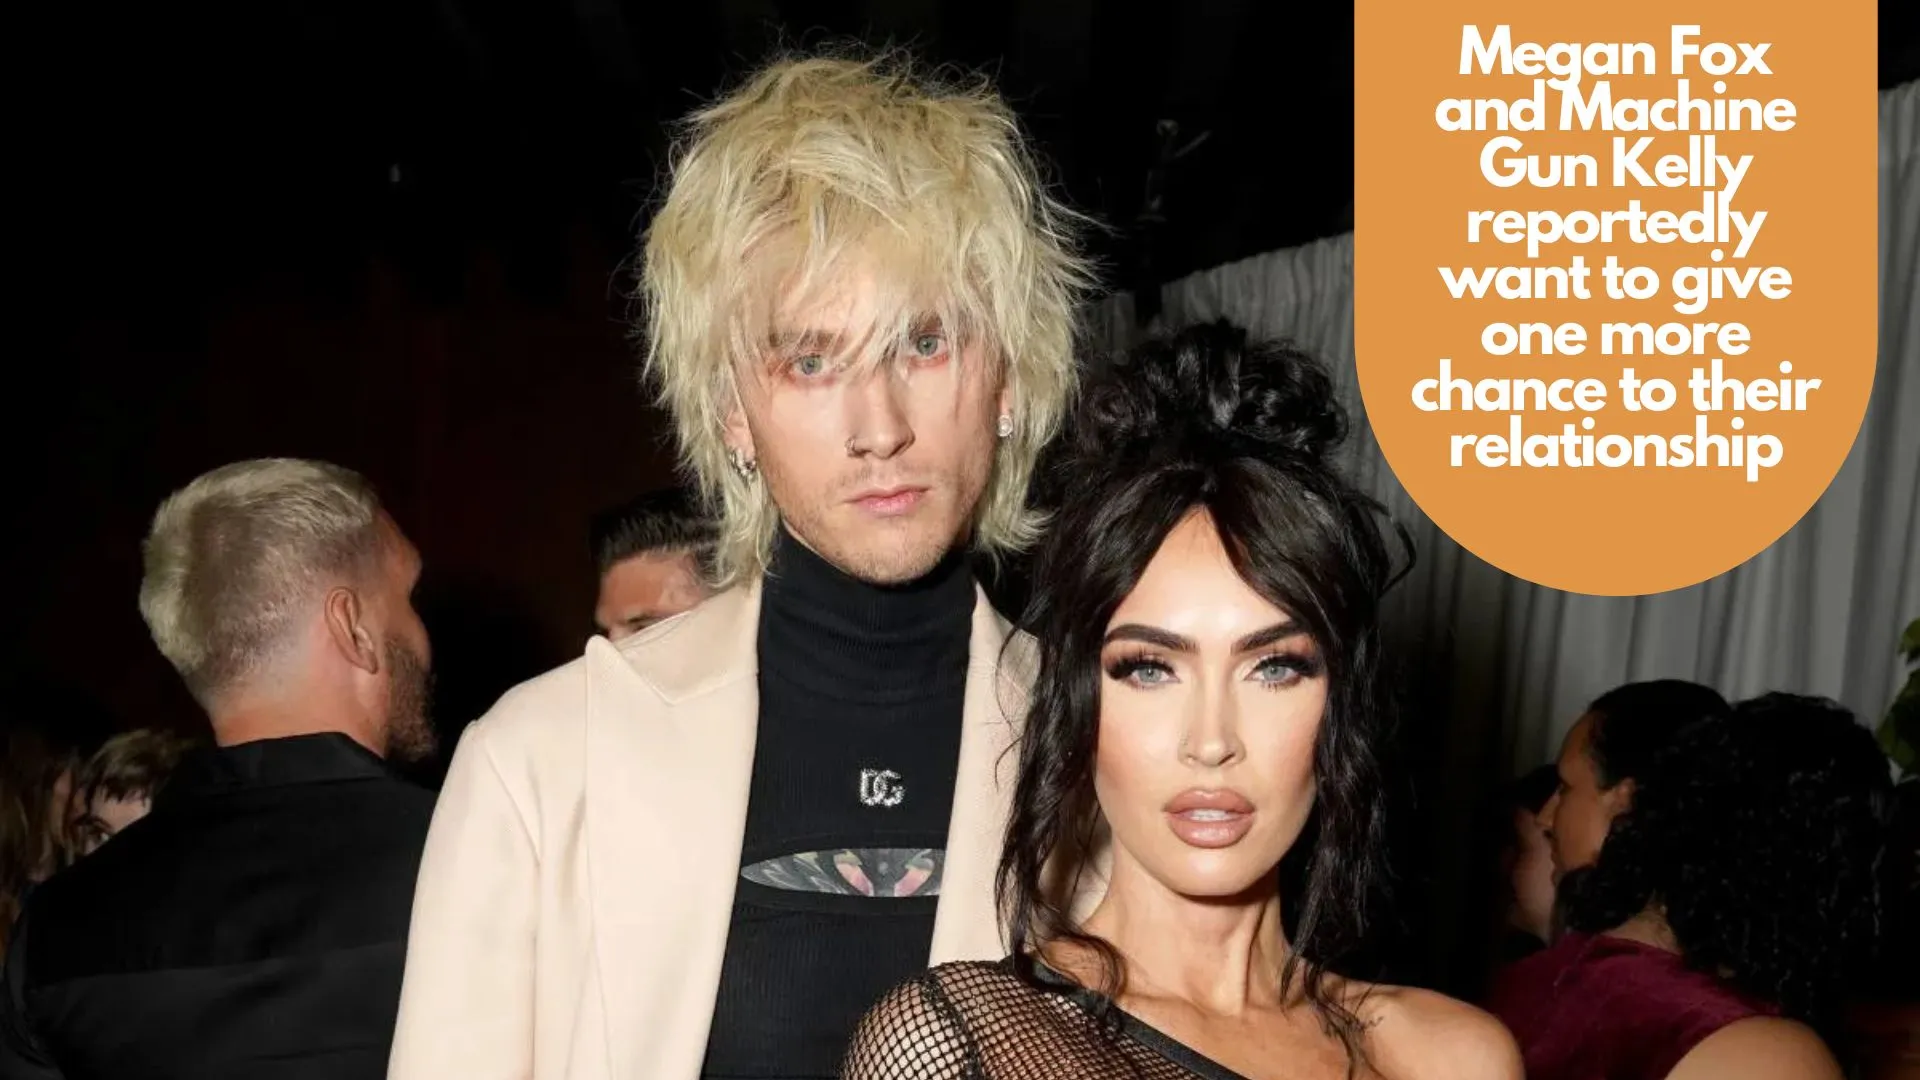 Megan Fox and Machine Gun Kelly reportedly want to give one more chance to their relationship( Image credit: hellomagazine)